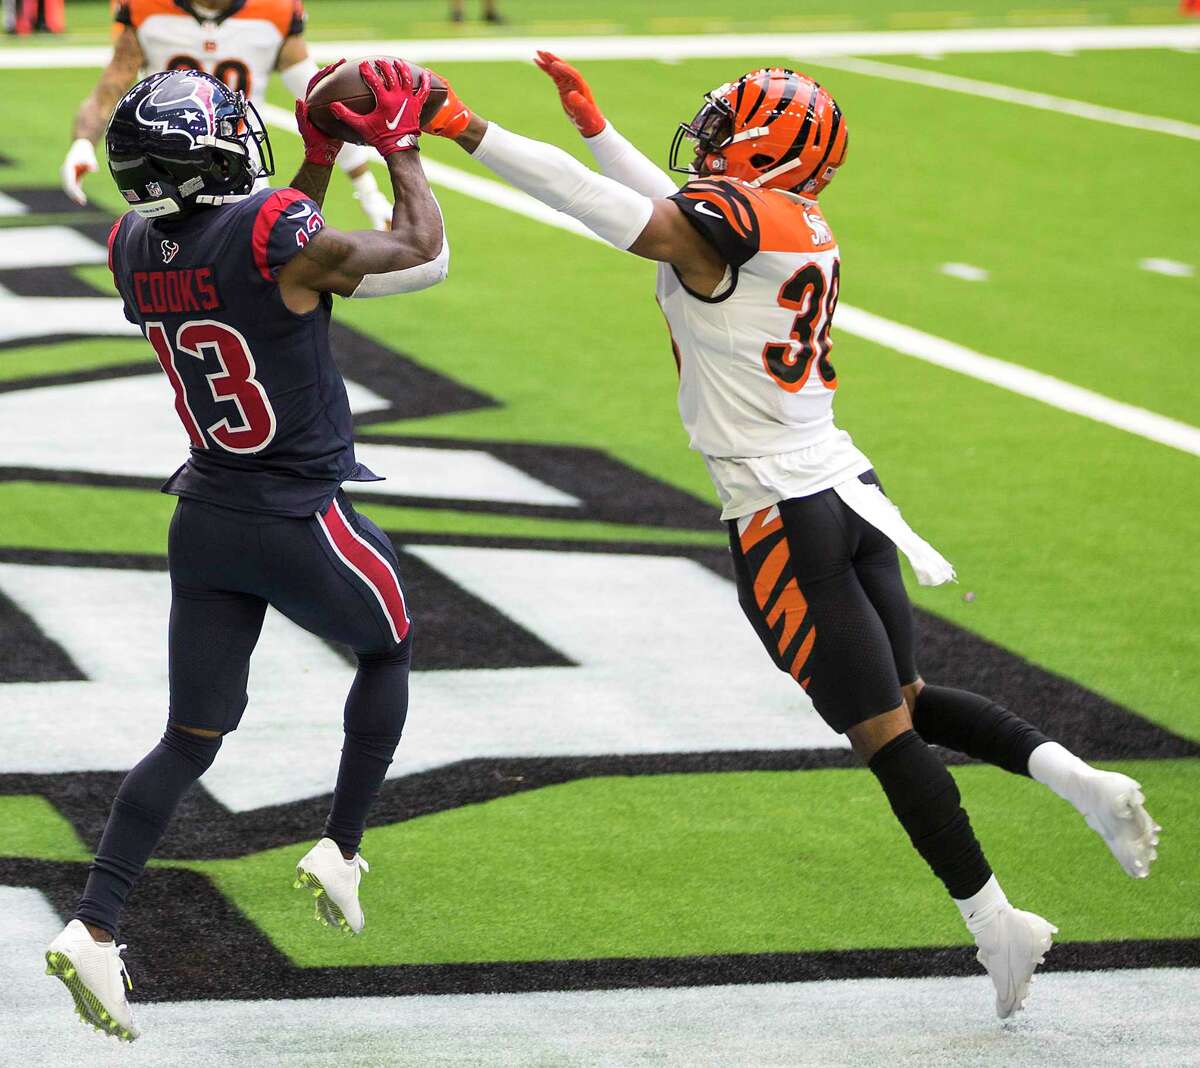 Houston Texans wide receiver Brandin Cooks (13) beats Cincinnati Bengals free safety Jessie Bates (30) into the end zone for a touchdown reception during the second quarter of an NFL football game at NRG Stadium on Sunday, Dec. 27, 2020, in Houston.